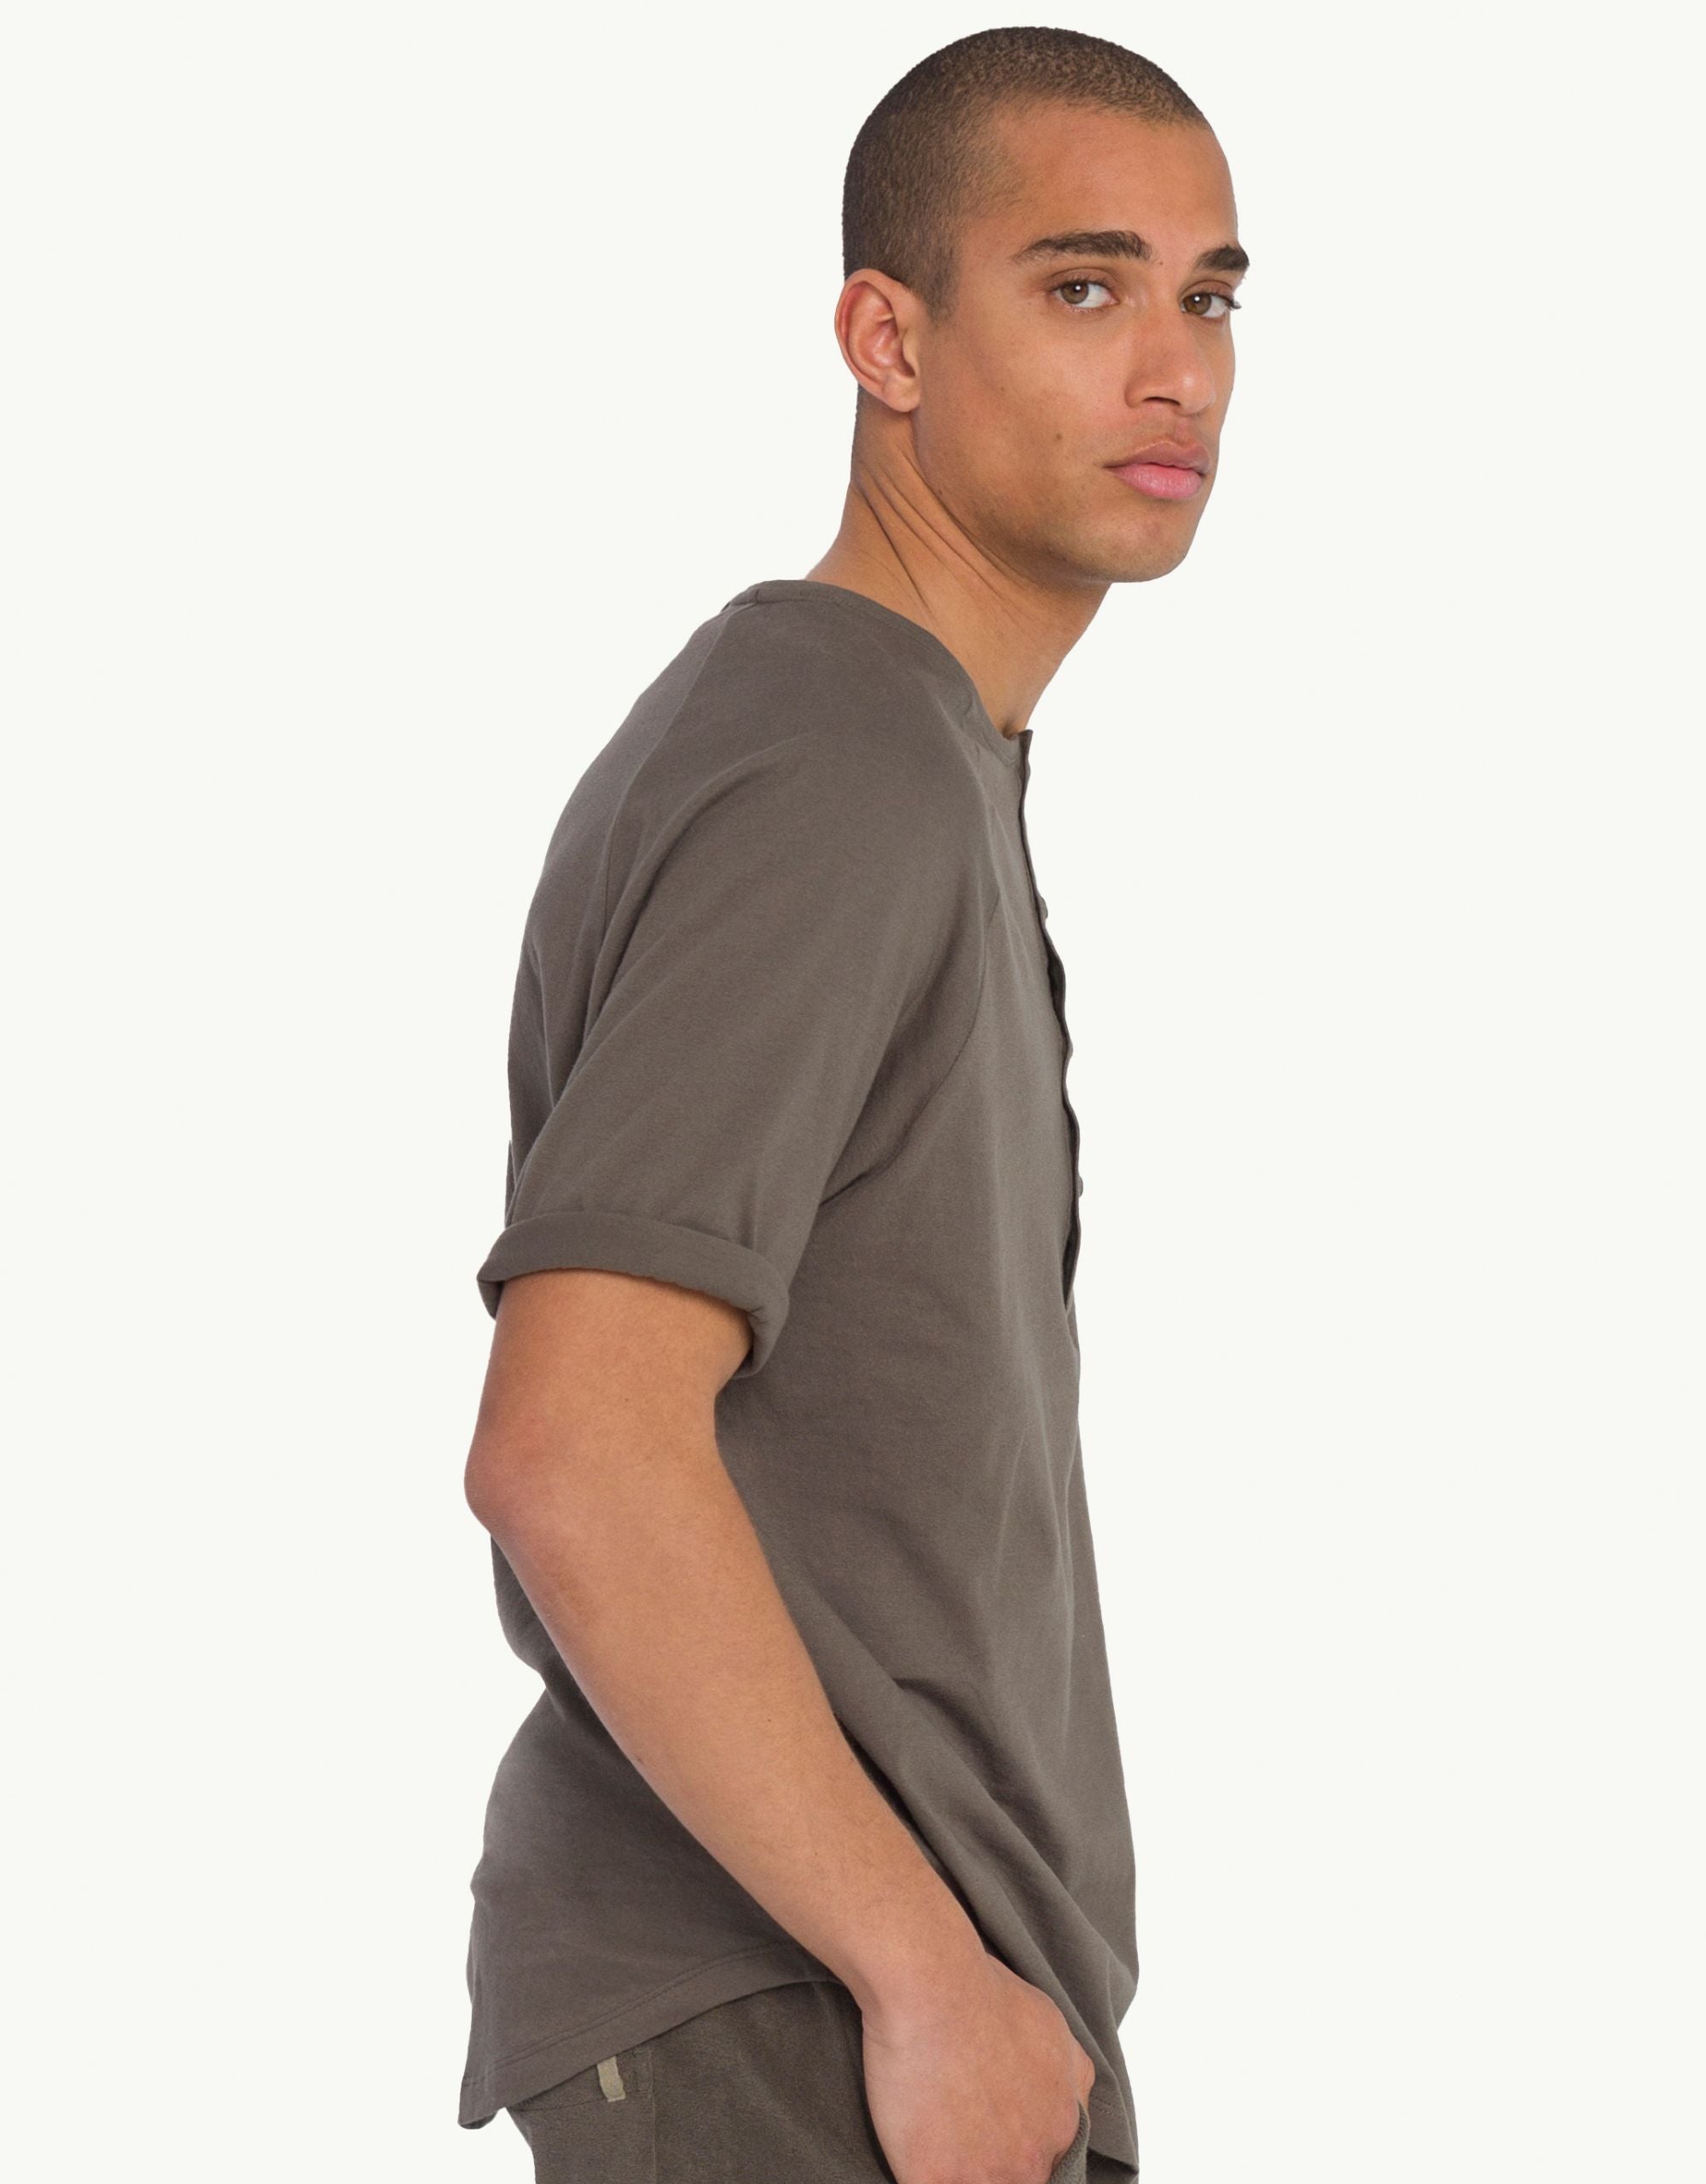 Discover sustainable fashion for men with our Abinibi T-shati. Half-sleeve polo t-shirt in grey color. Crafted for everyday luxury, our tees provide unmatched softness and all-day comfort. Stay cool in our breathable organic cotton tees for men, made from 100% organic cotton to champion sustainability and skin-friendly choices.